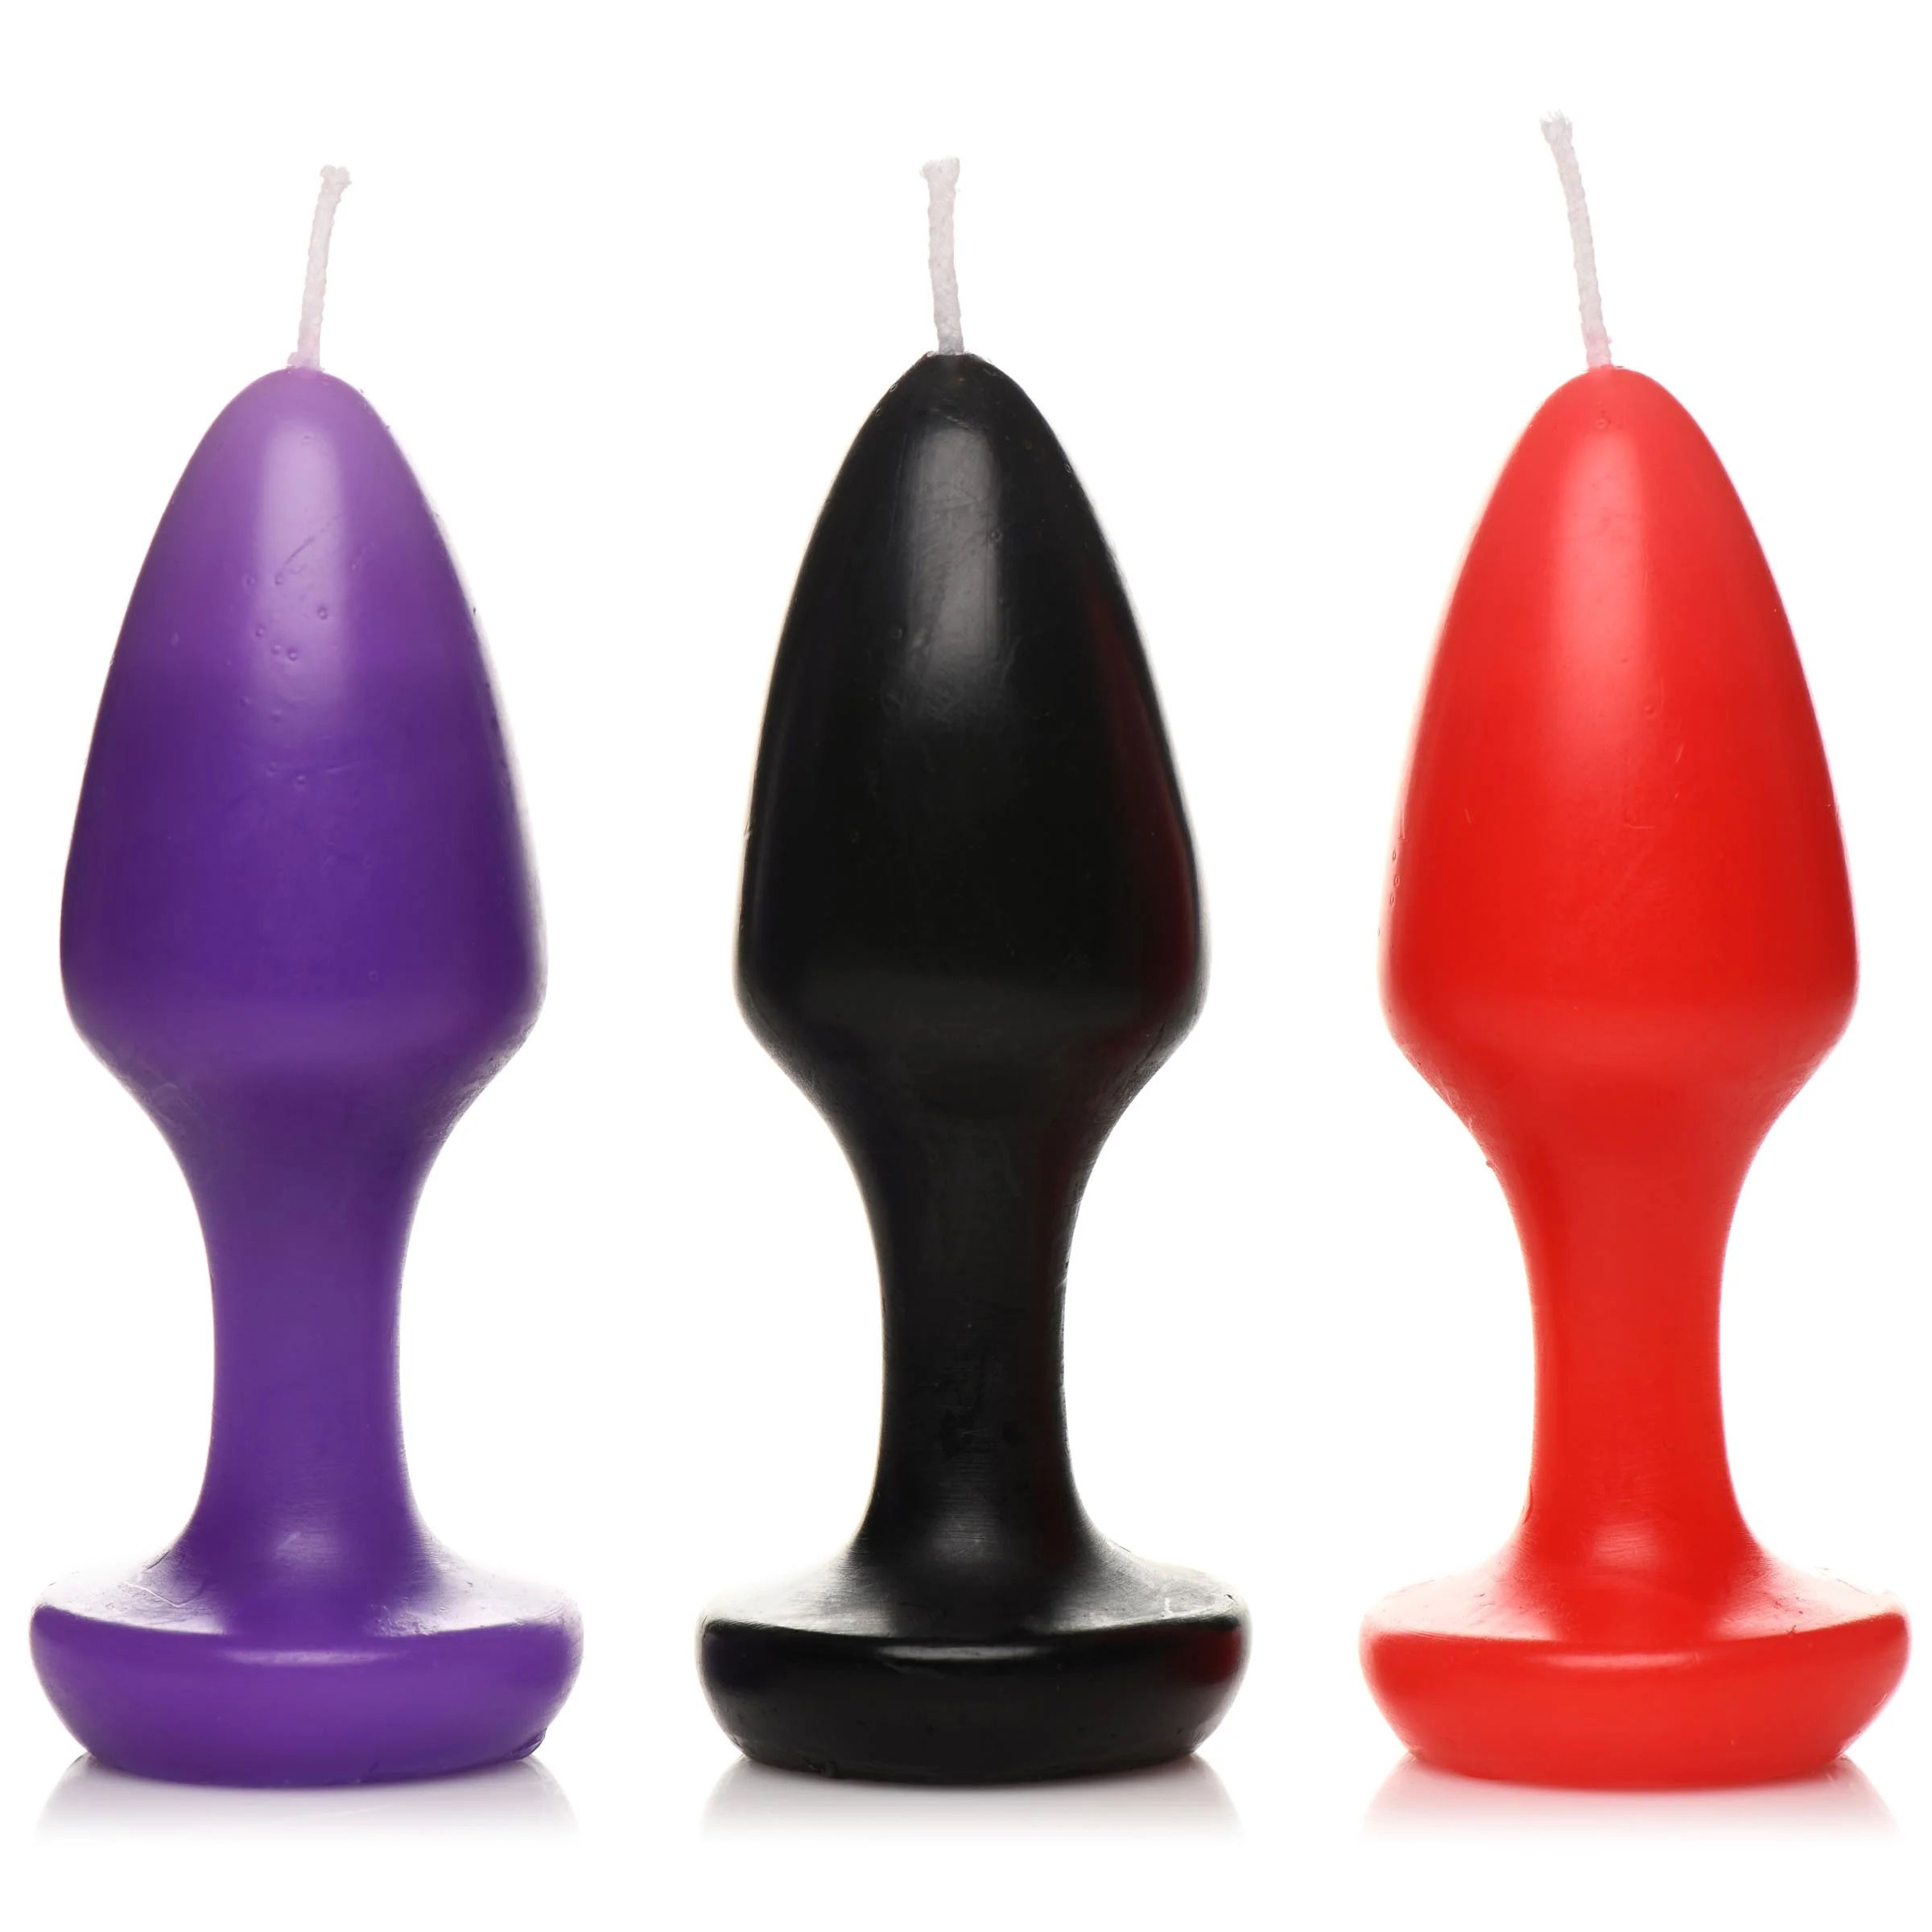 kink inferno drip candles black, purple, red 